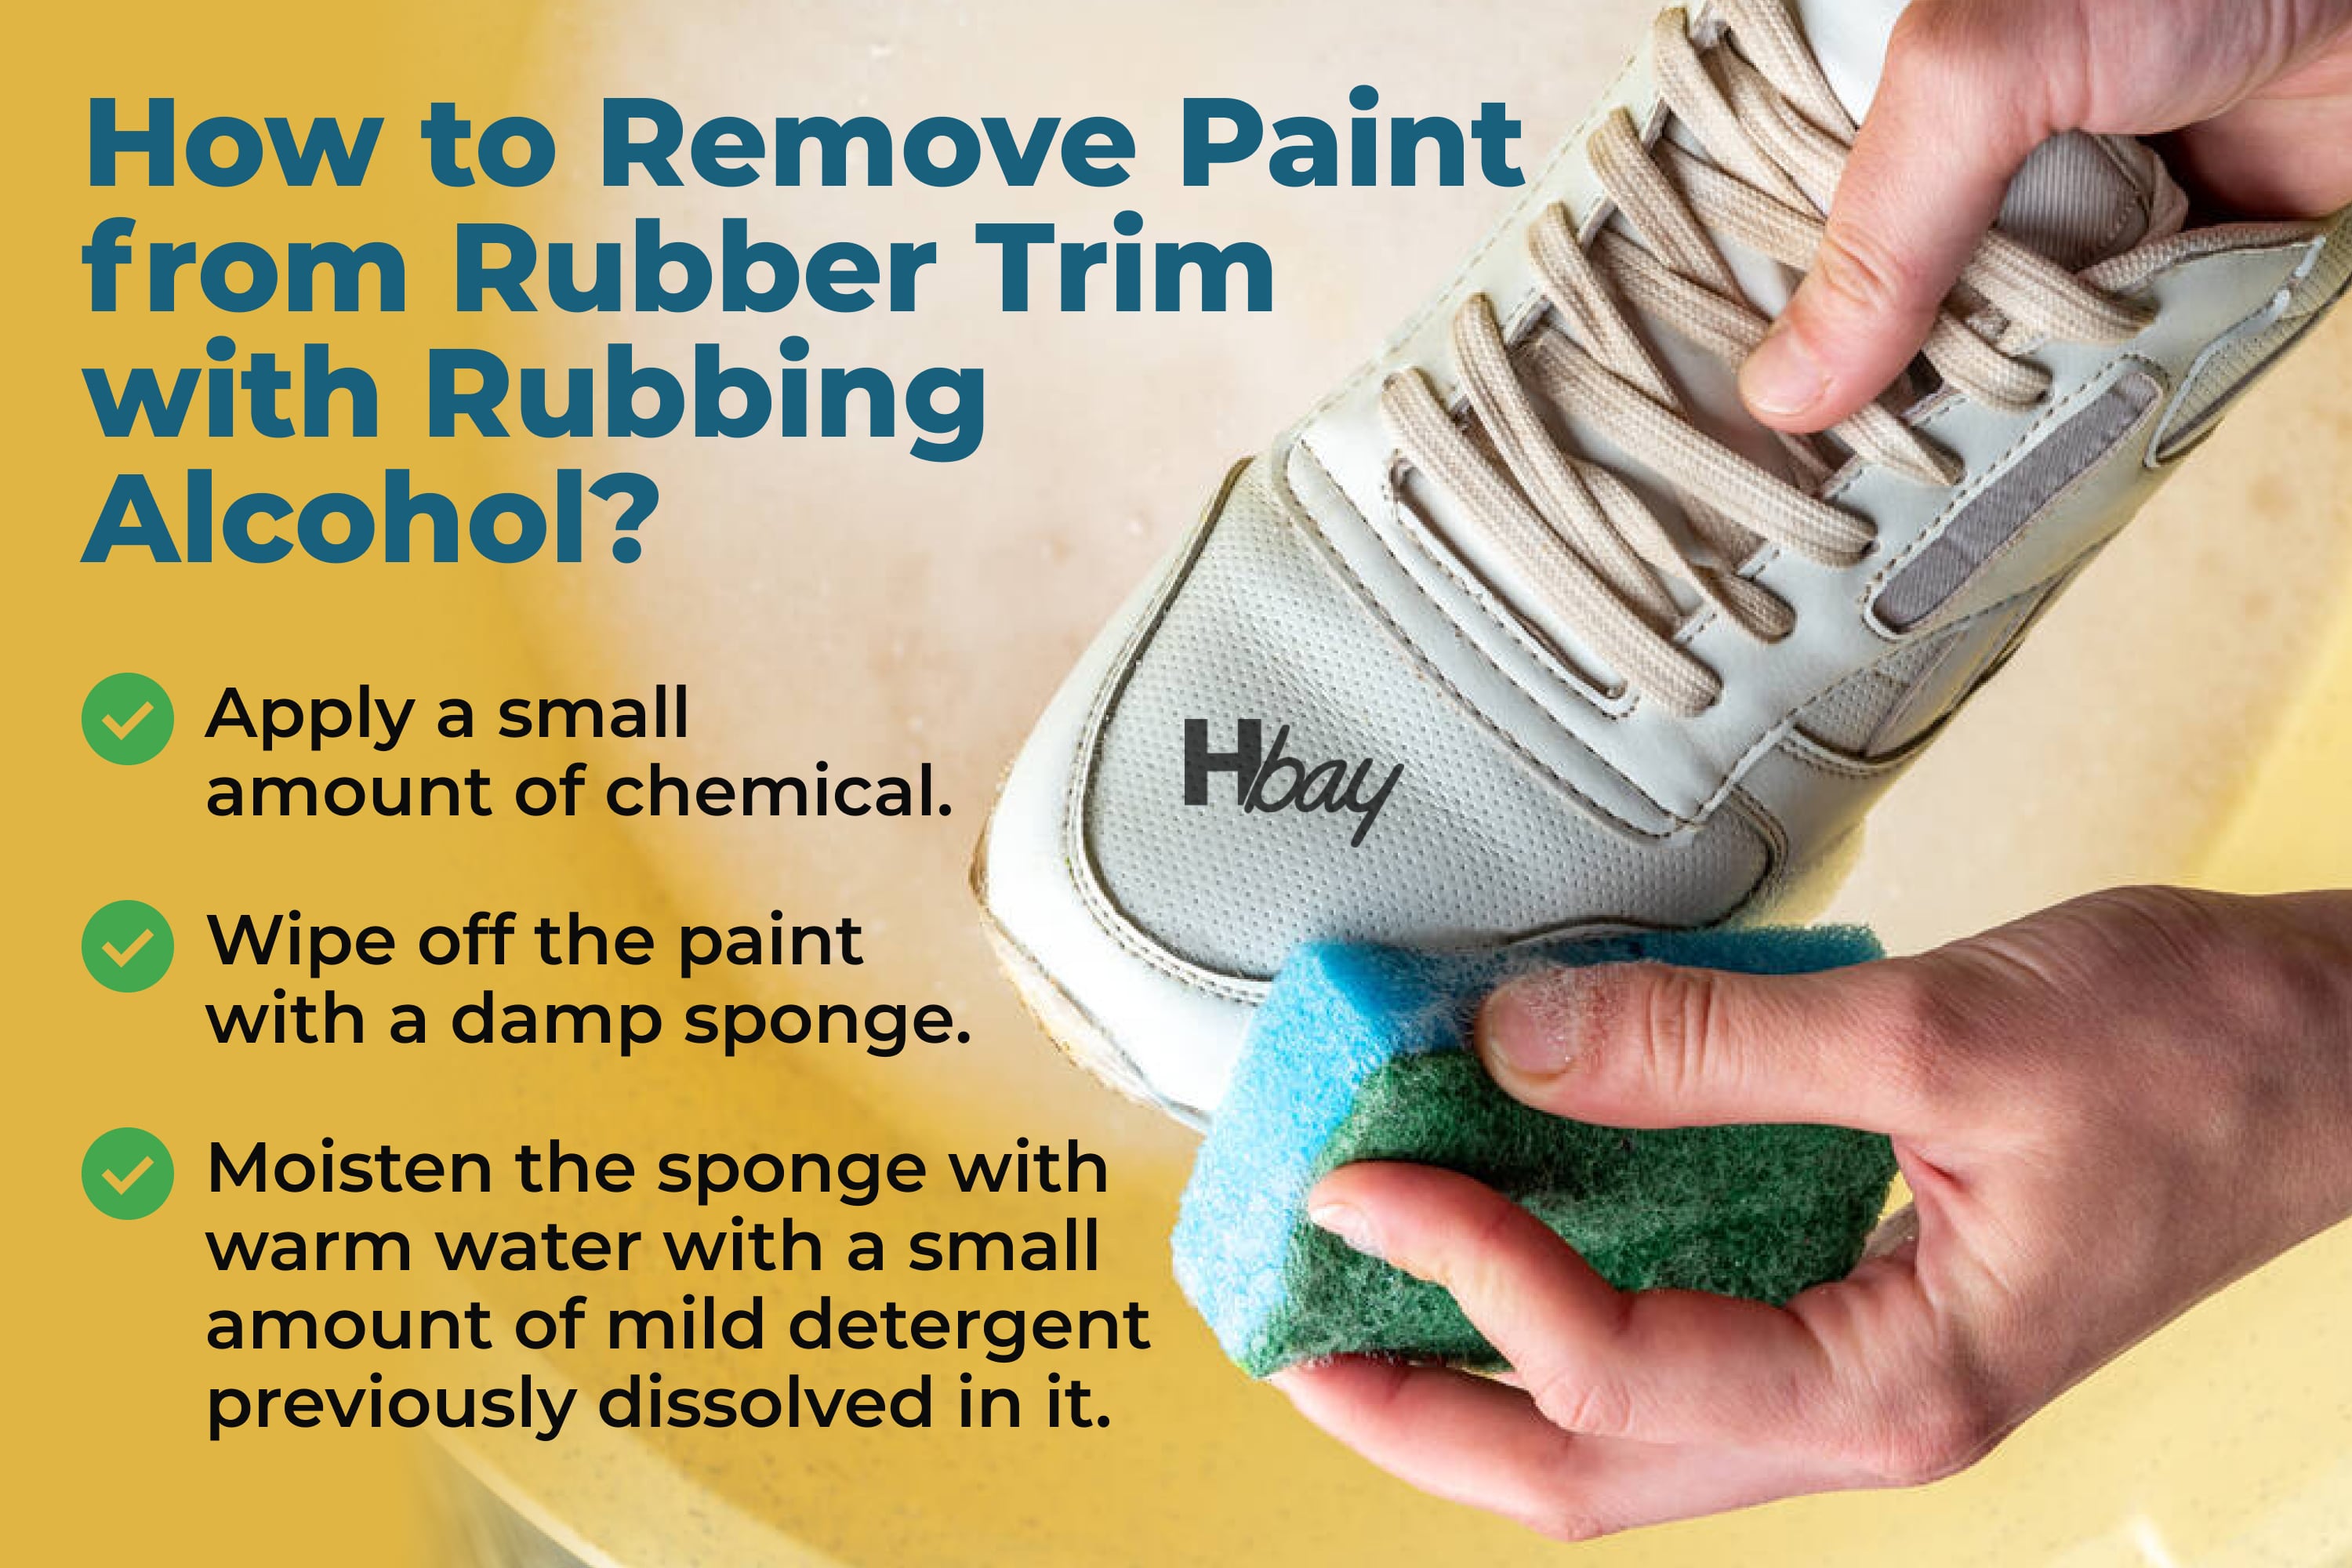 How to remove paint from rubber trim with rubbing alcohol